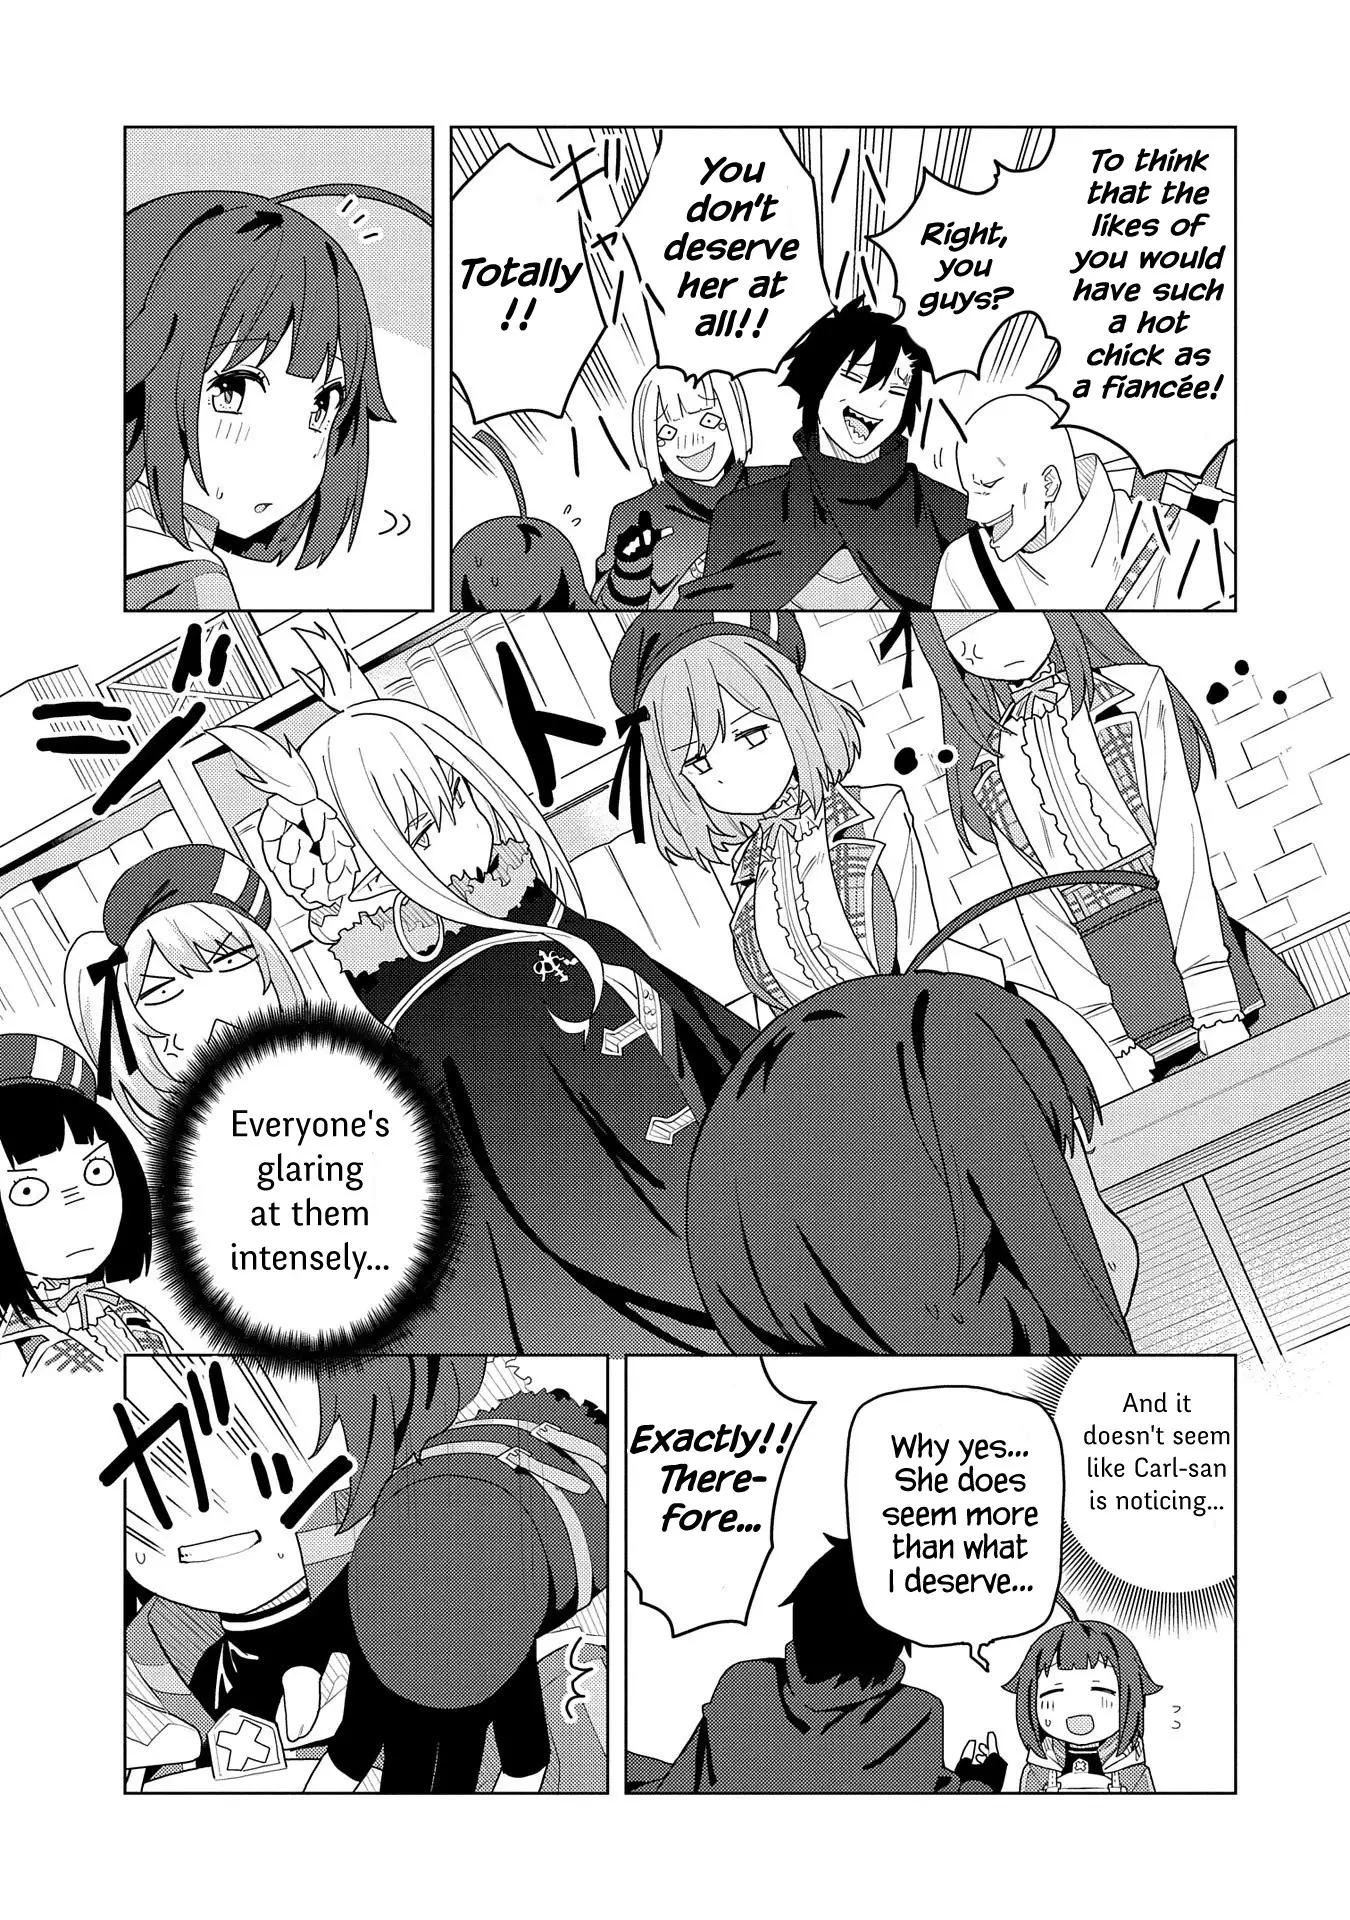 I Summoned The Devil To Grant Me A Wish, But I Married Her Instead Since She Was Adorable ~My New Devil Wife~ - 2 page 37